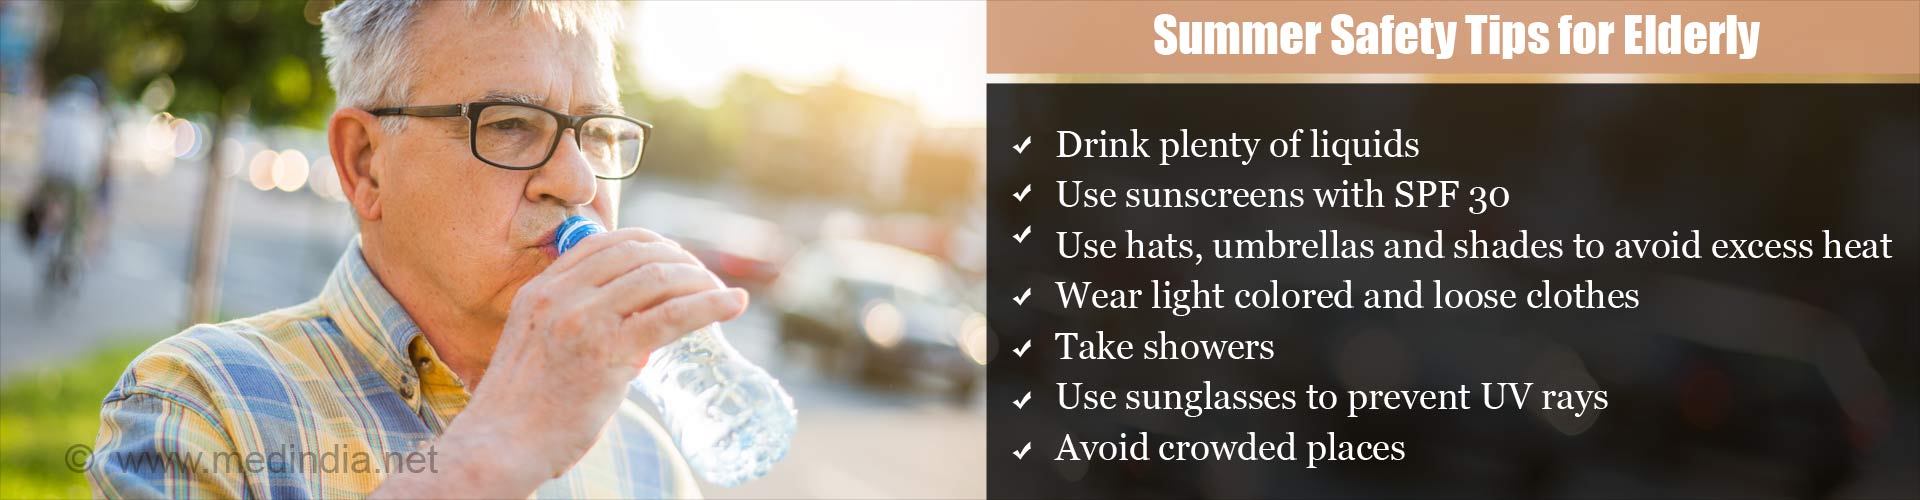 Summer safety tips for elderly
- brace yourself for this summer. Summer can affect health especially the elderly who are more prone to heat-related illnesses. A few tips can help beat the scorching heat